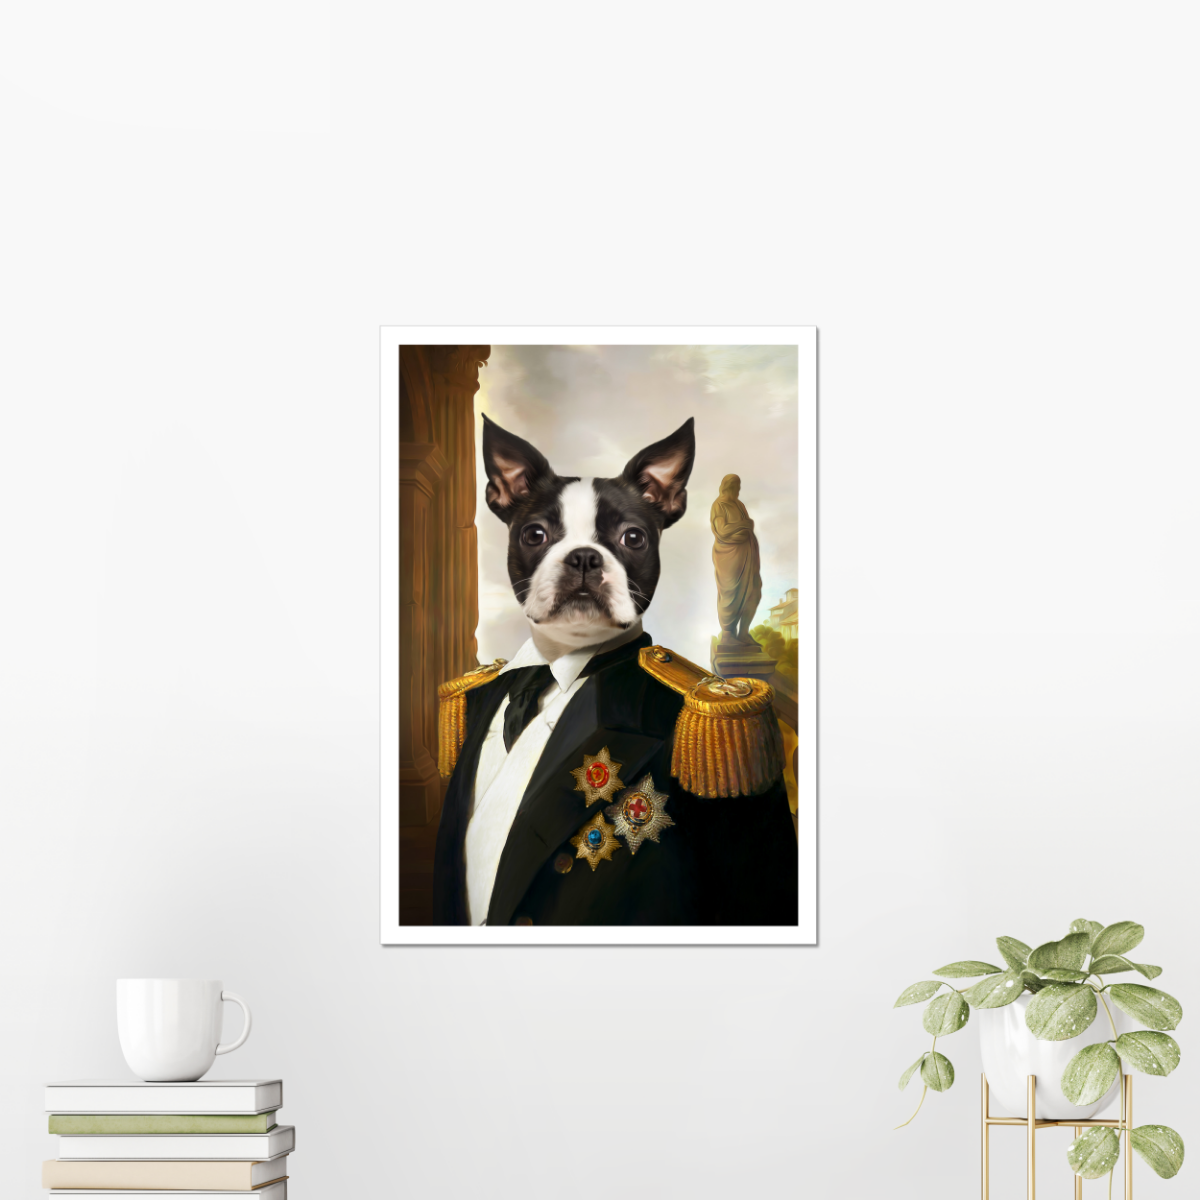 The Sargent: Custom Pet Poster - Paw & Glory - #pet portraits# - #dog portraits# - #pet portraits uk#Paw & Glory, paw and glory, pet portrait singapore, puppy portrait, original pet portraits, draw your pet portrait, pet portraits in oils, personalized pet and owner canvas, pet portraits